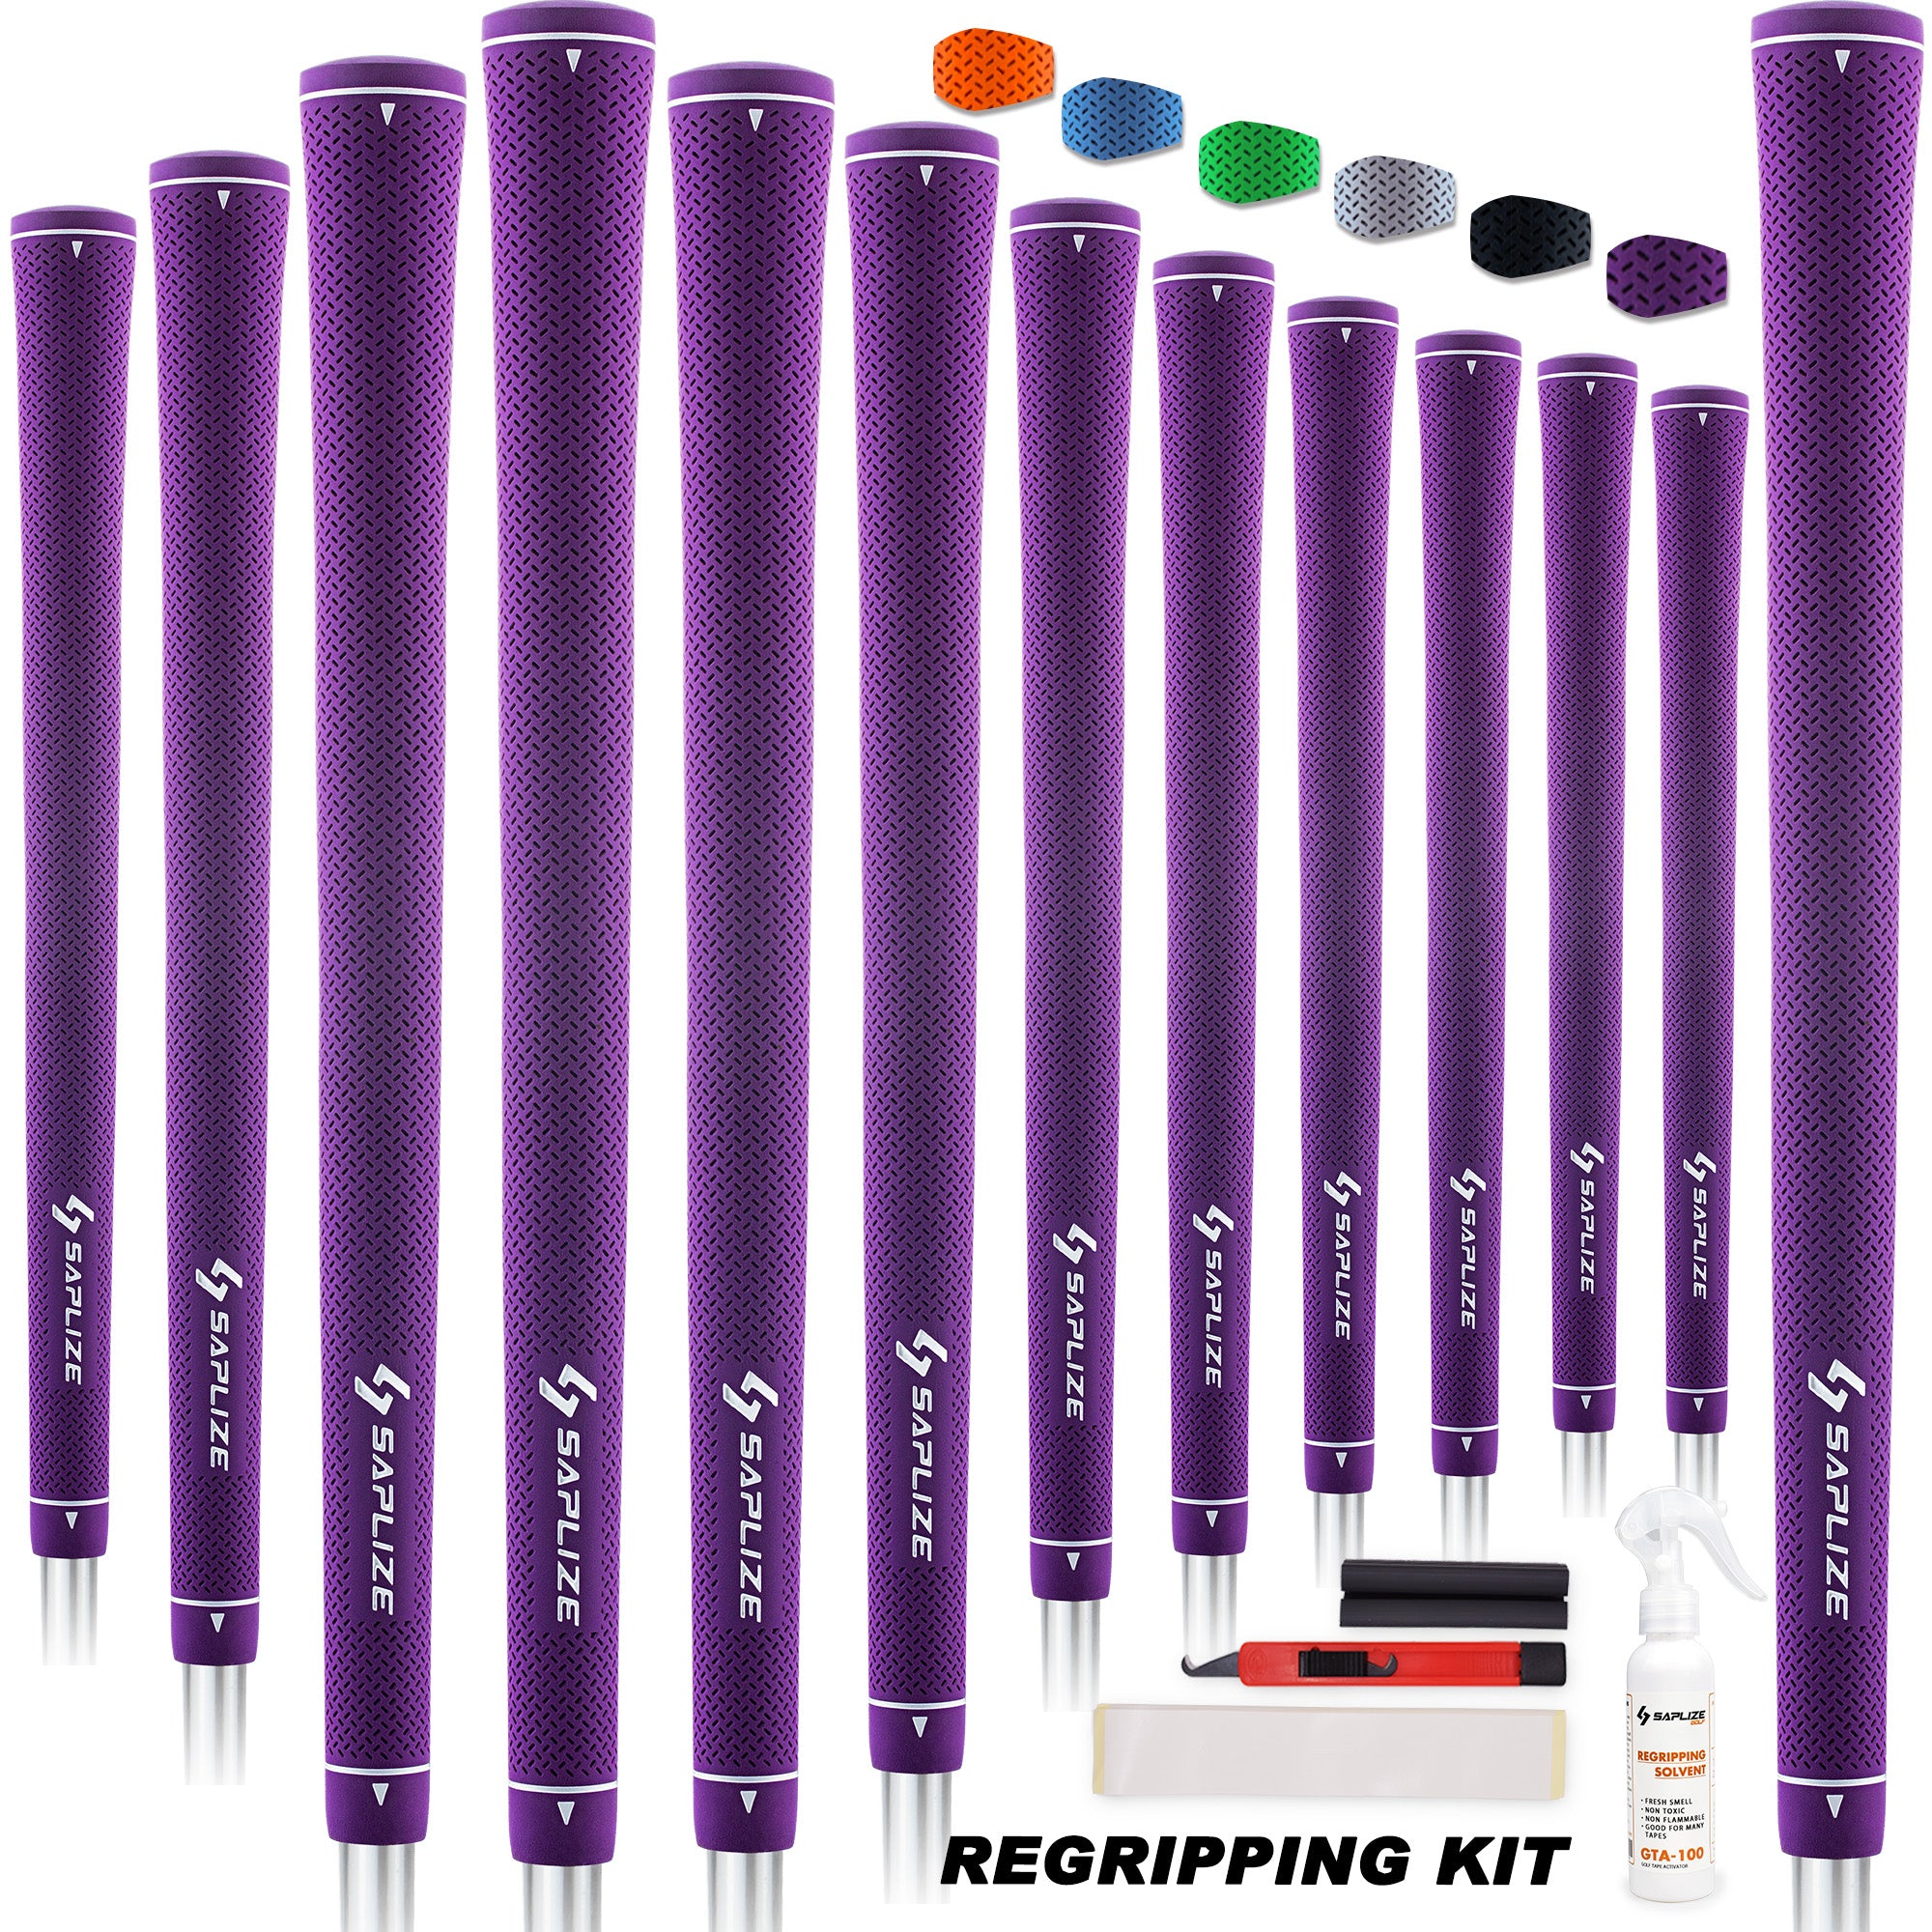 CC02 Rubber Golf Grips 13 pcs Pack with Solvent/Tape Kit